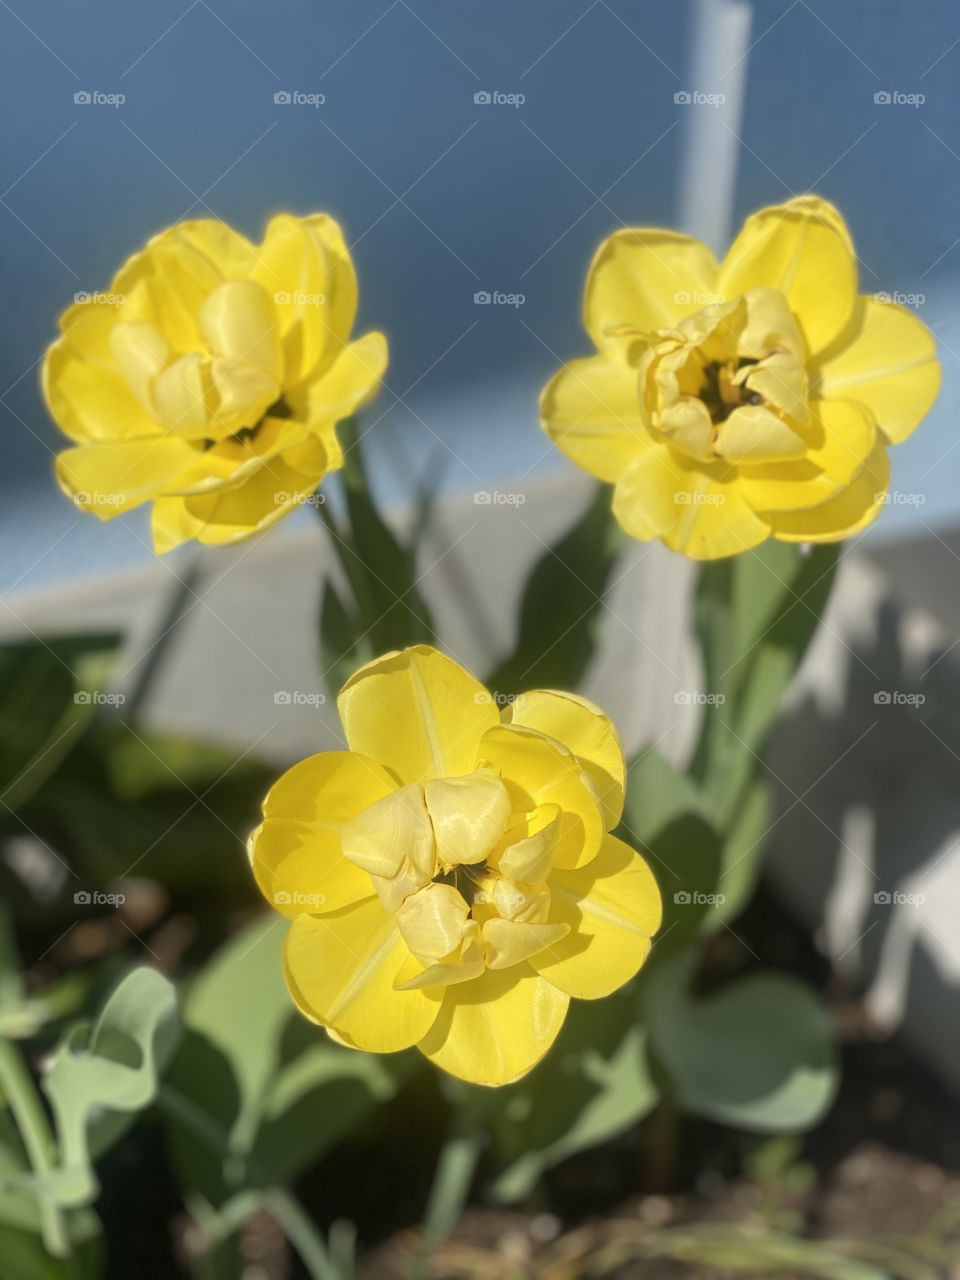 spring flowers, holiday flowers, flowers as a gift, colorful flowers, roses, daffodils, yellow flowers, shop flowers, fresh flowers, nature, flowers in a pot, flowers grow